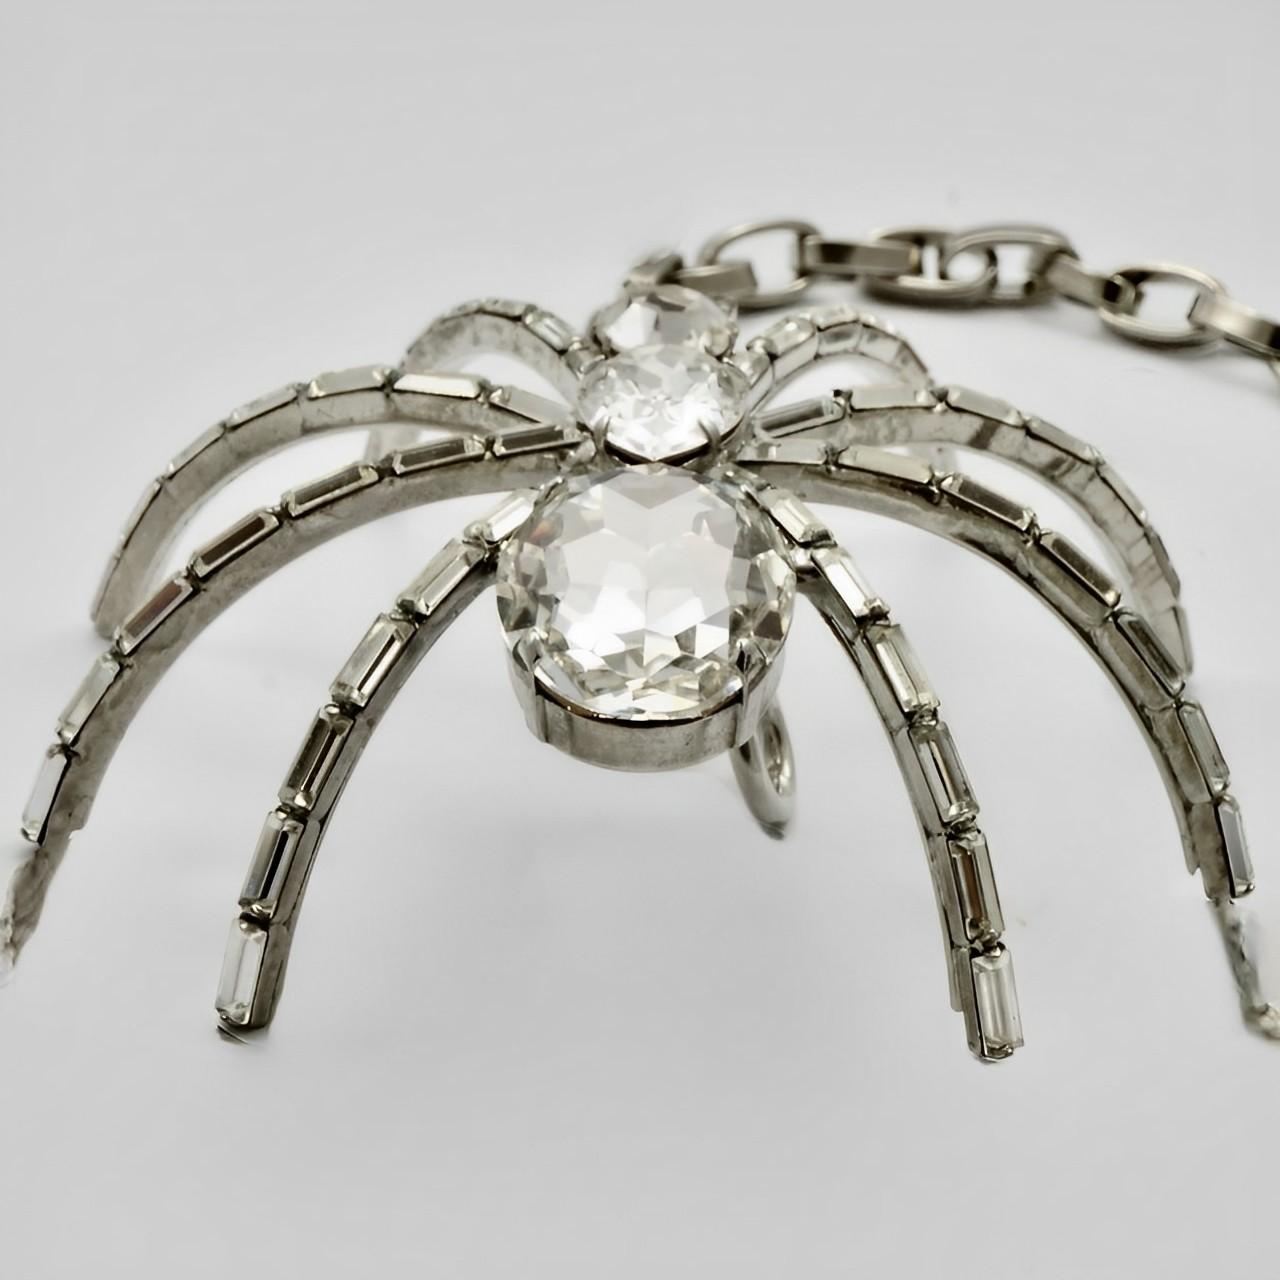 Butler and Wilson Silver Tone and Crystal Large Spider Chain Belt circa 1980s For Sale 6